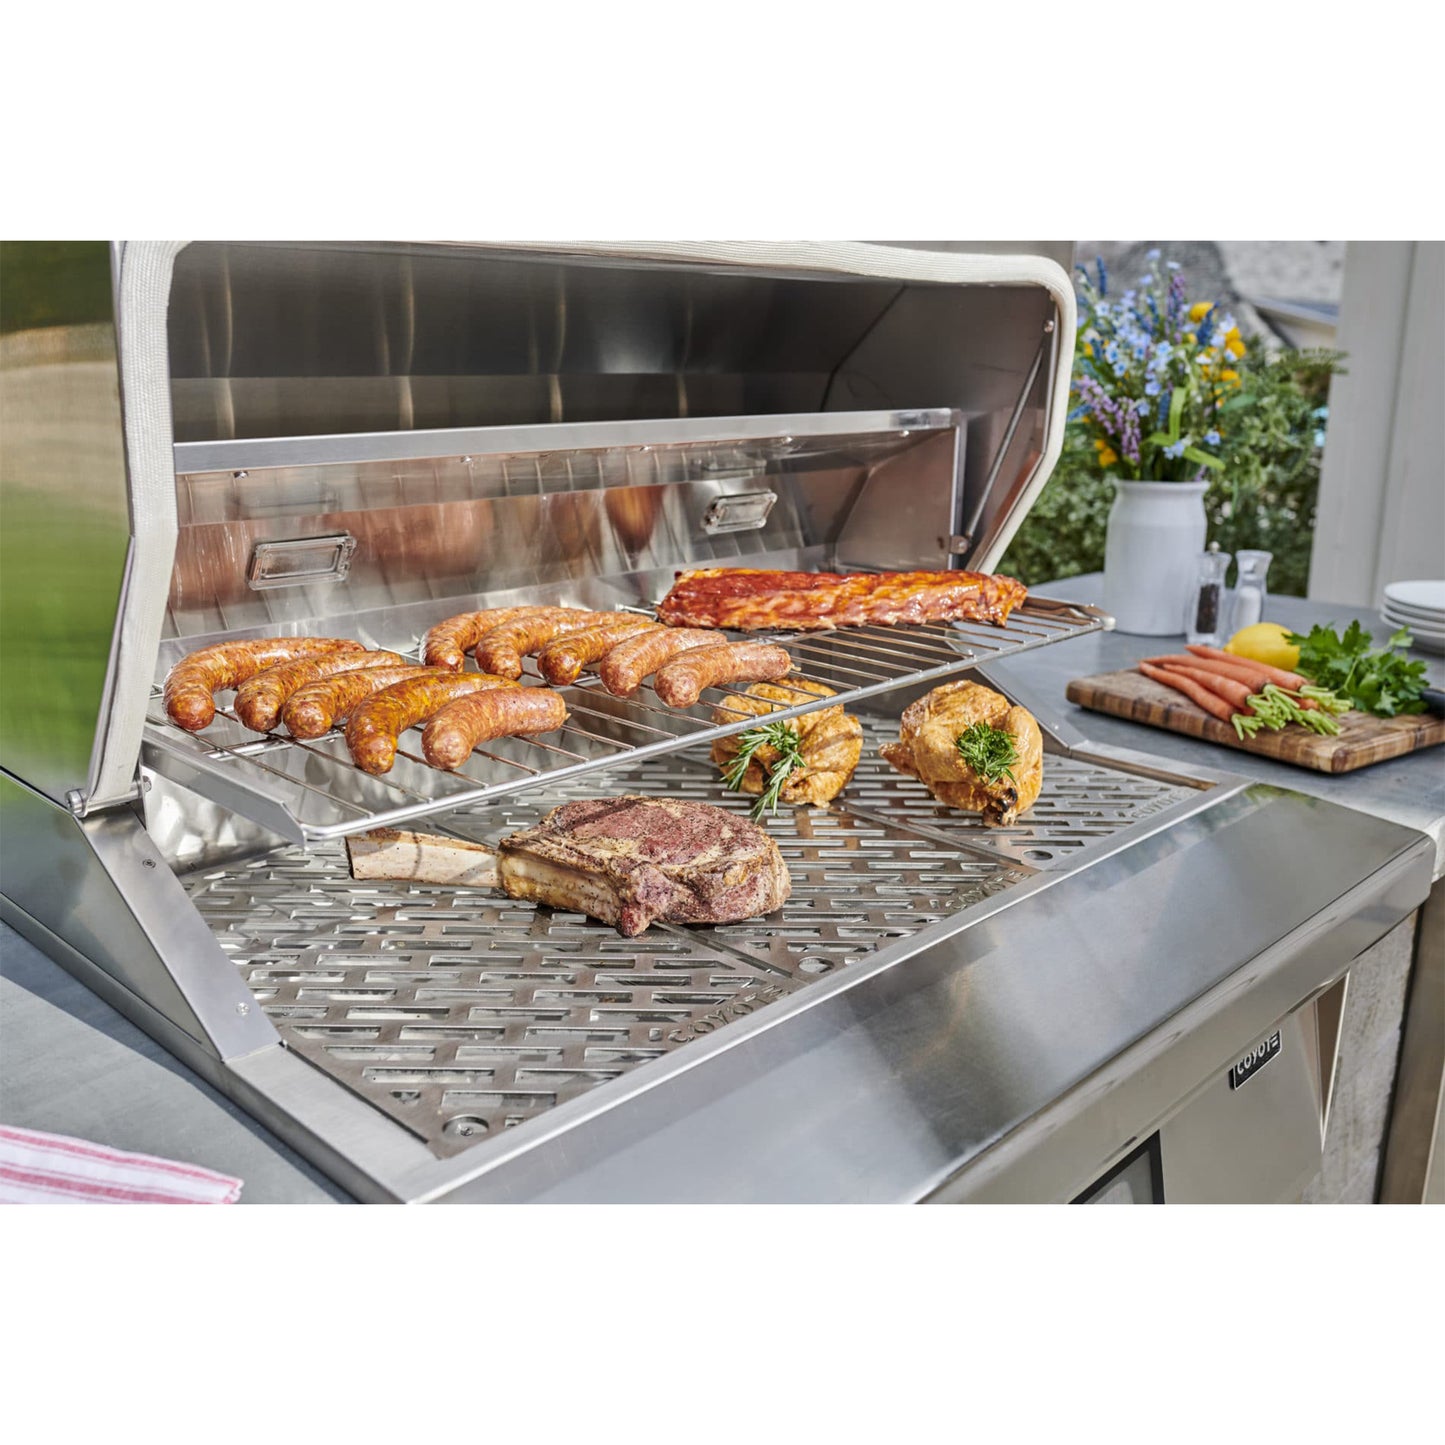 Coyote Built-In Pellet Grill (28-inch & 36-inch)